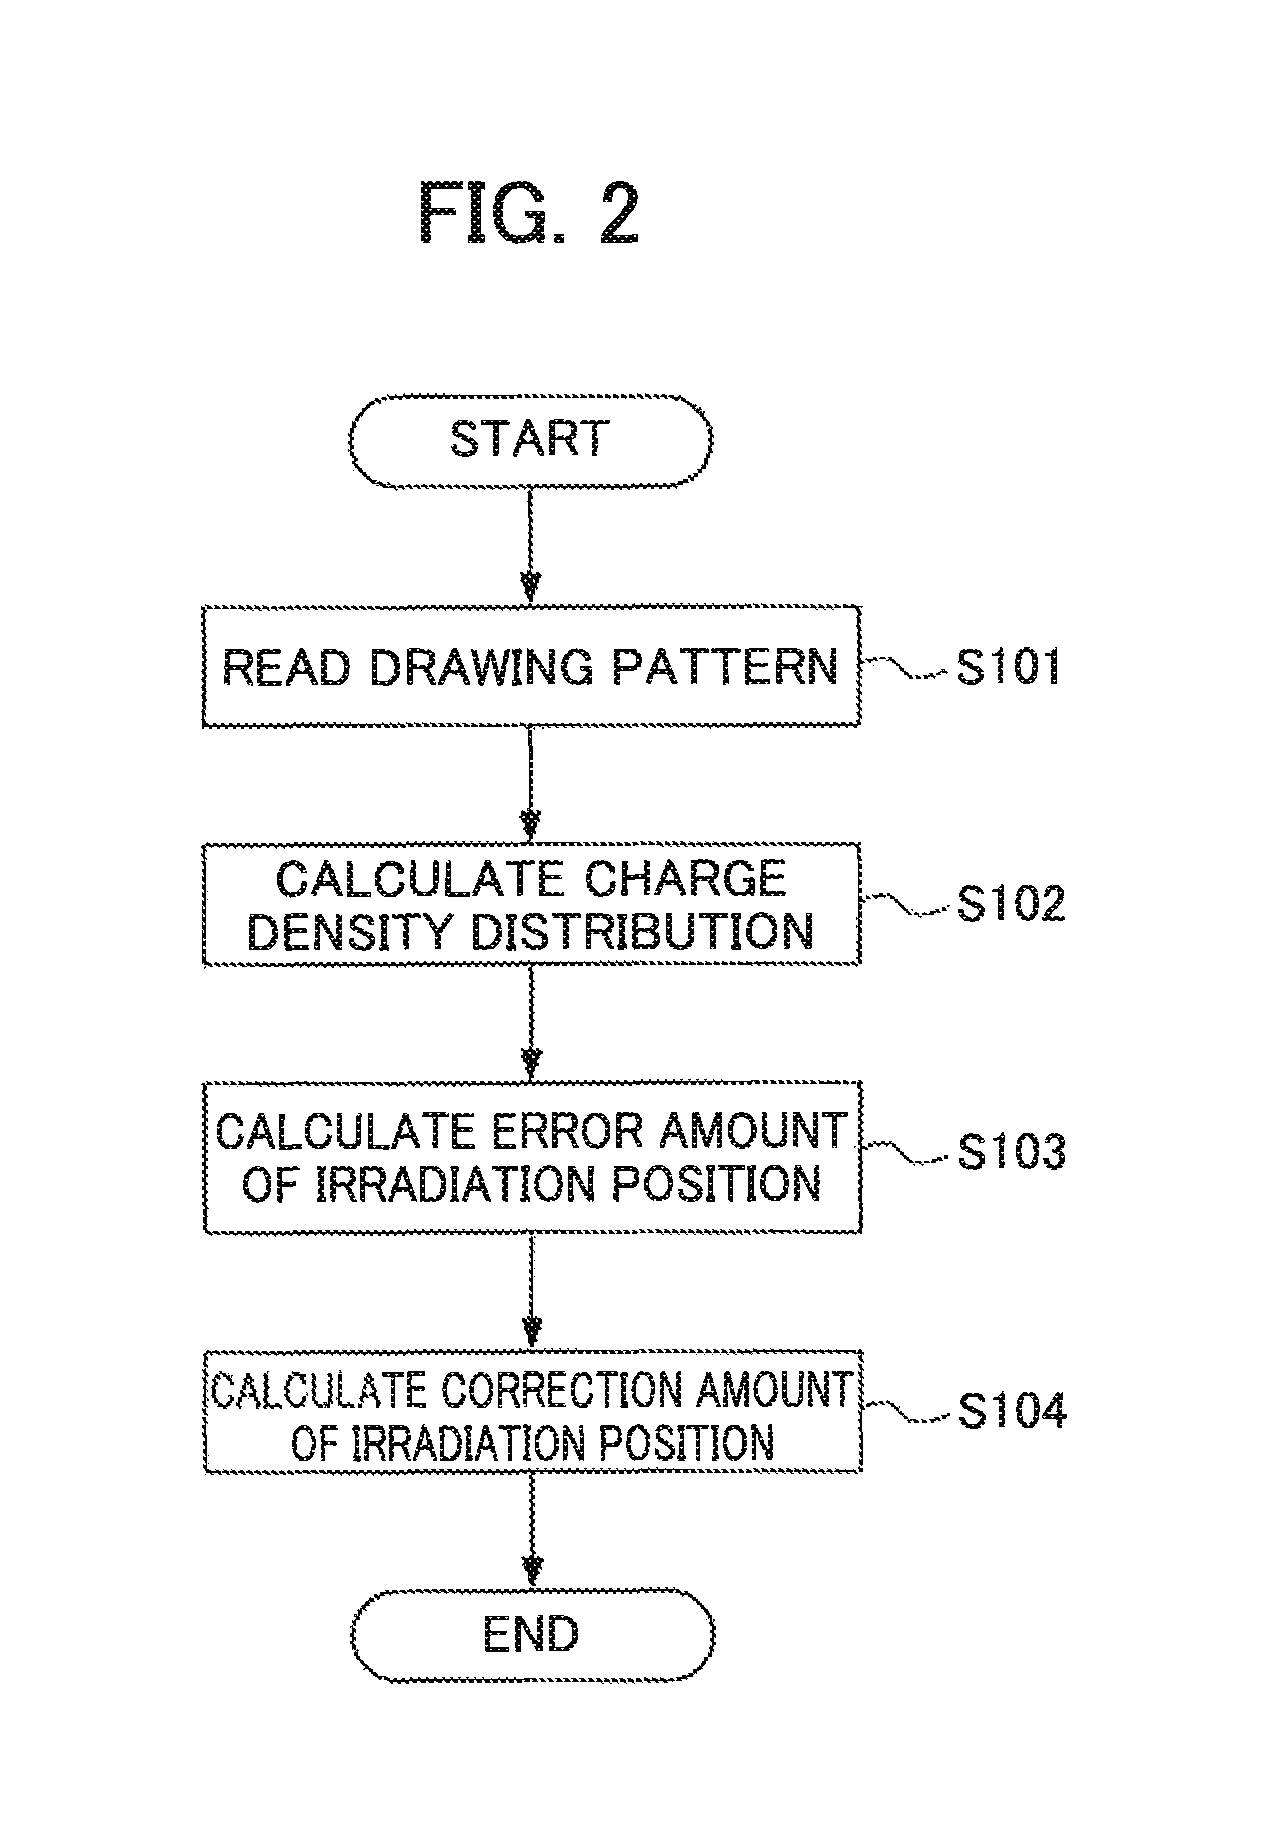 Program for correcting charged particle radiation location, device for calculating degree of correction of charged particle radiation location, charged particle radiation system, and method for correcting charged particle radiation location